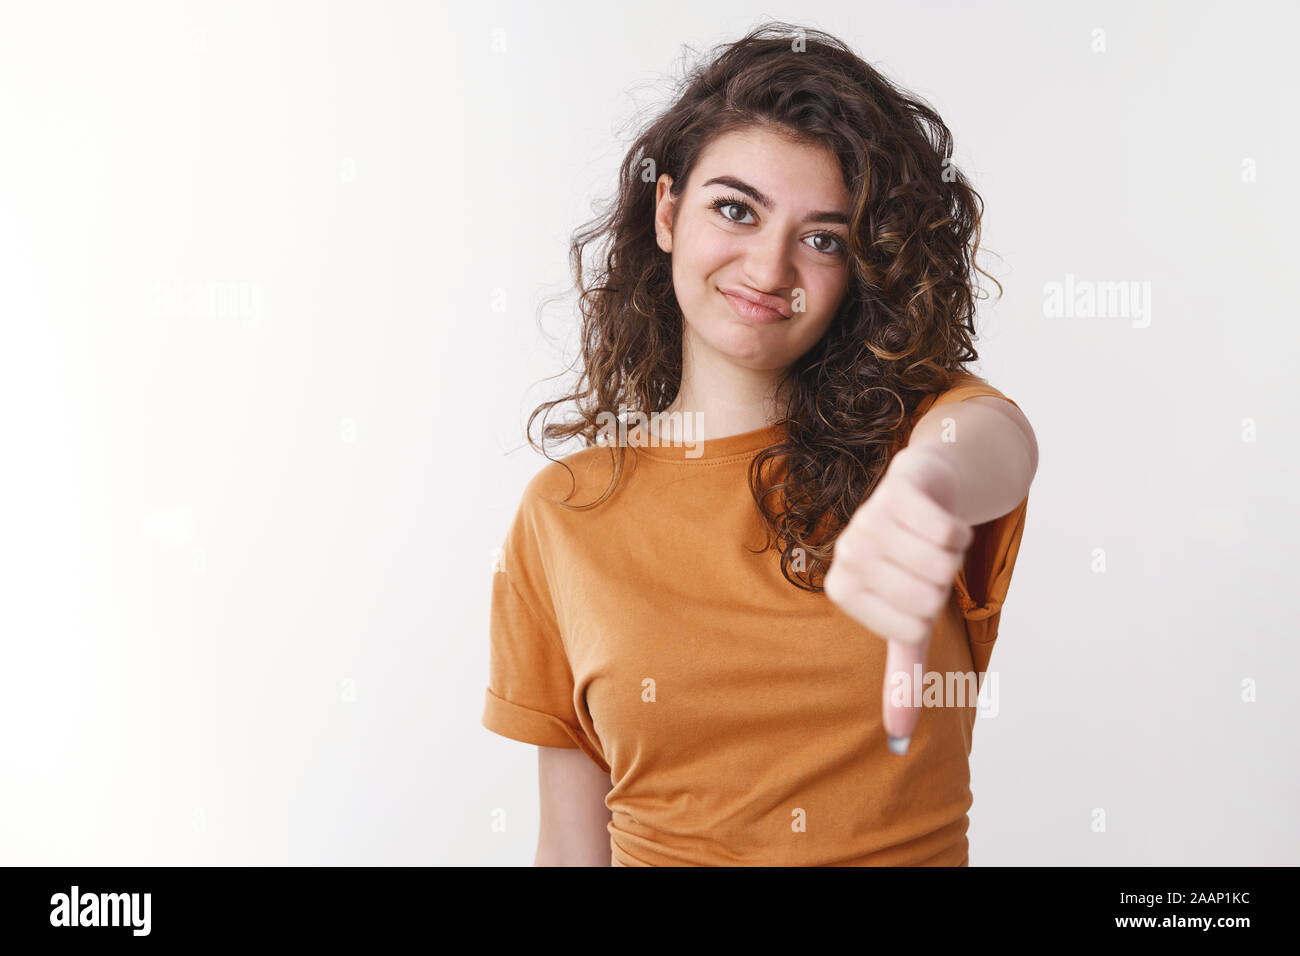 Lame. Unimpressed disappointed attractive charismatic curly-haired girl frowning cringing dislike show thumb-down gesture mocking losing team, give Stock Photo